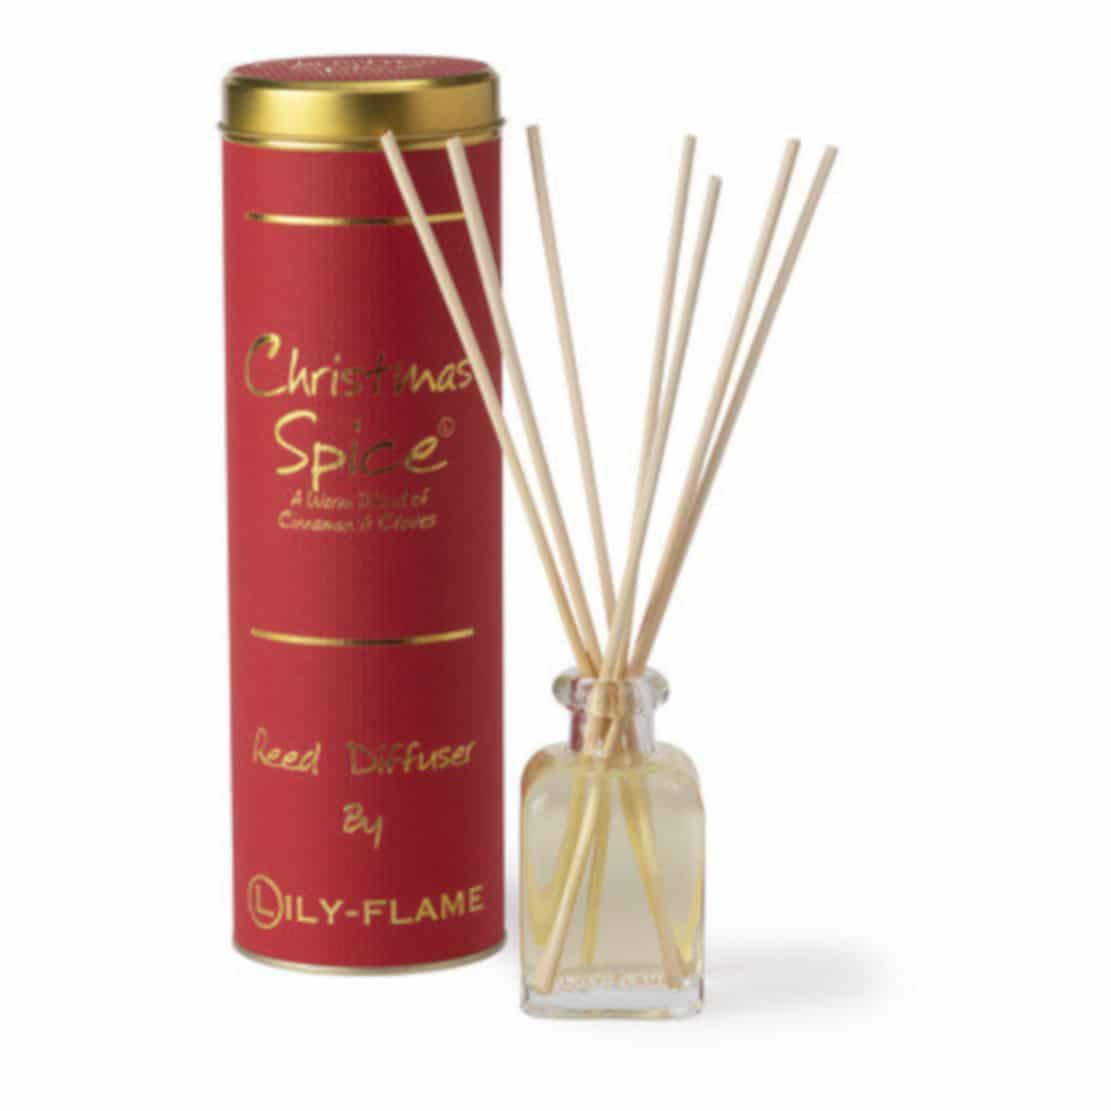 Lily Flame Christmas Spice Reed Diffuser